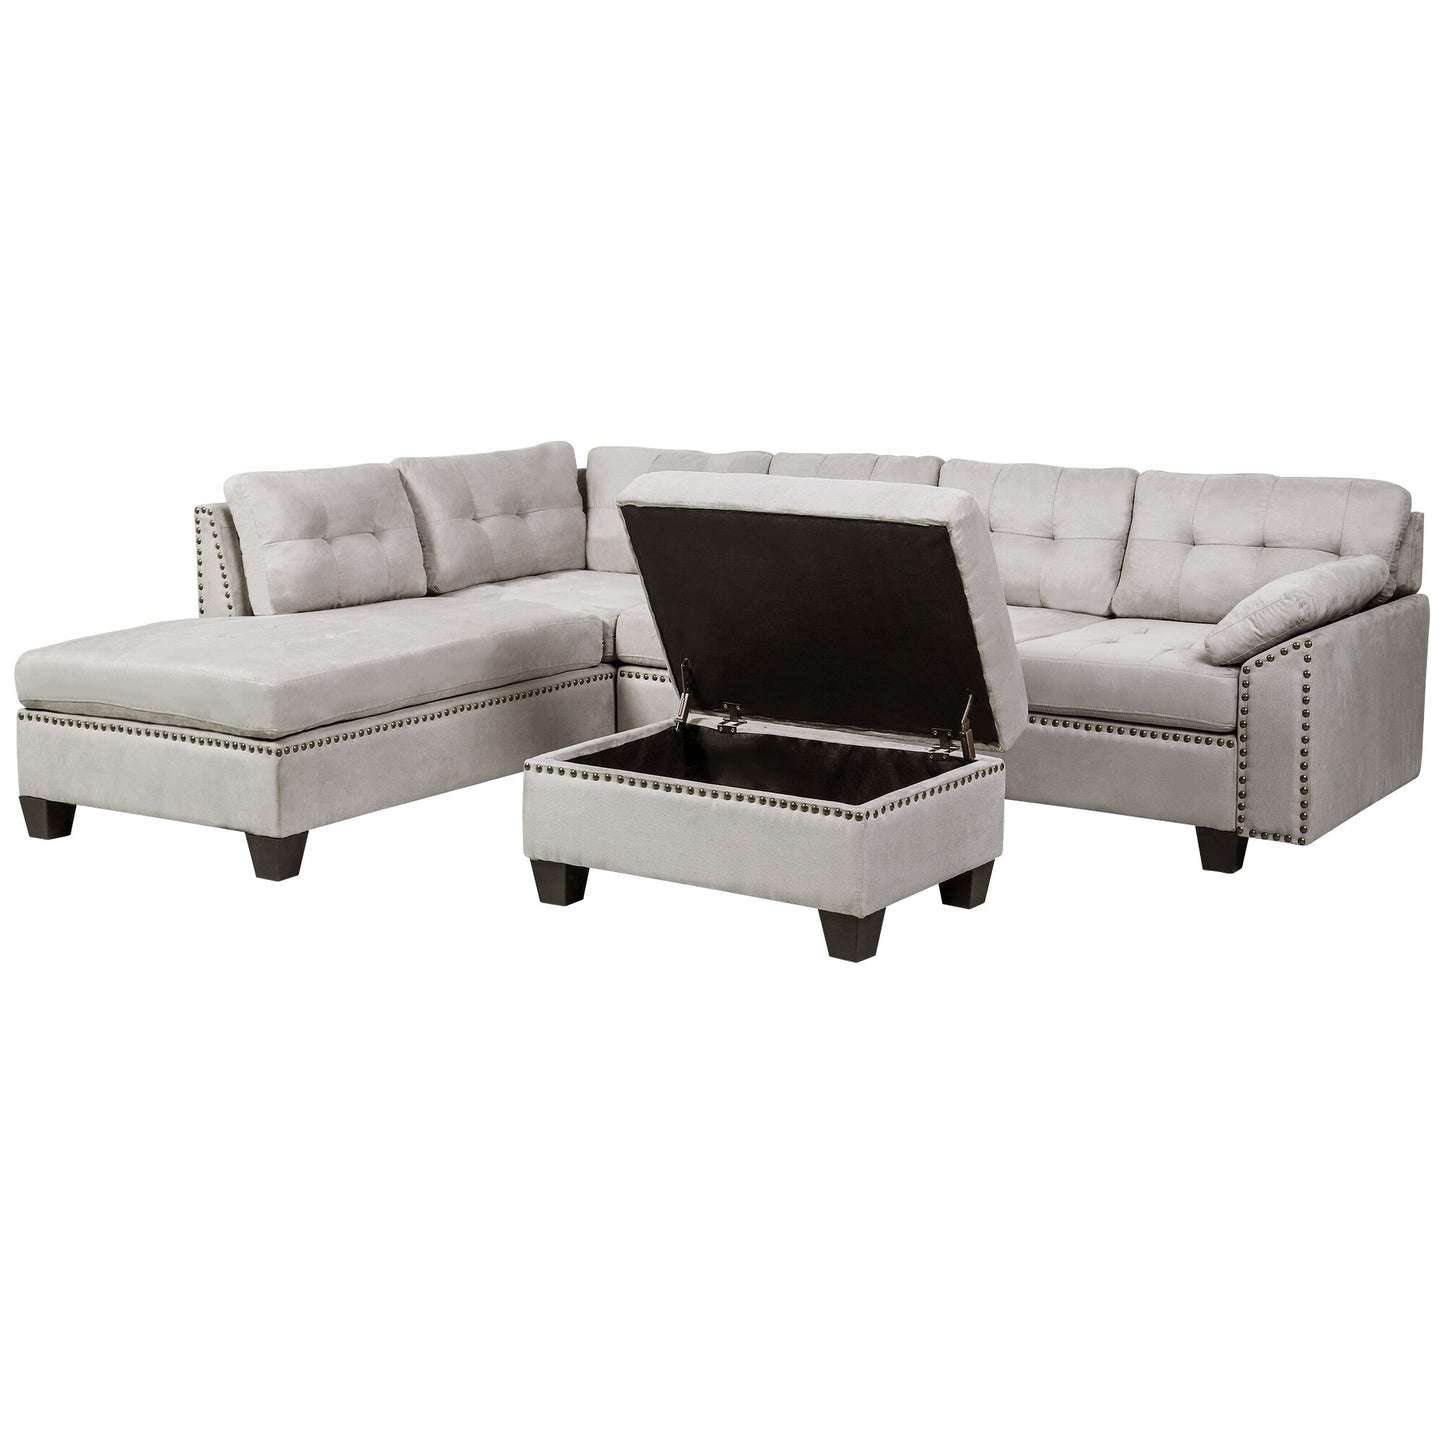 Sectional Sofa Set With Chaise Lounge And Storage Ottoman Nail Head Detail Grey